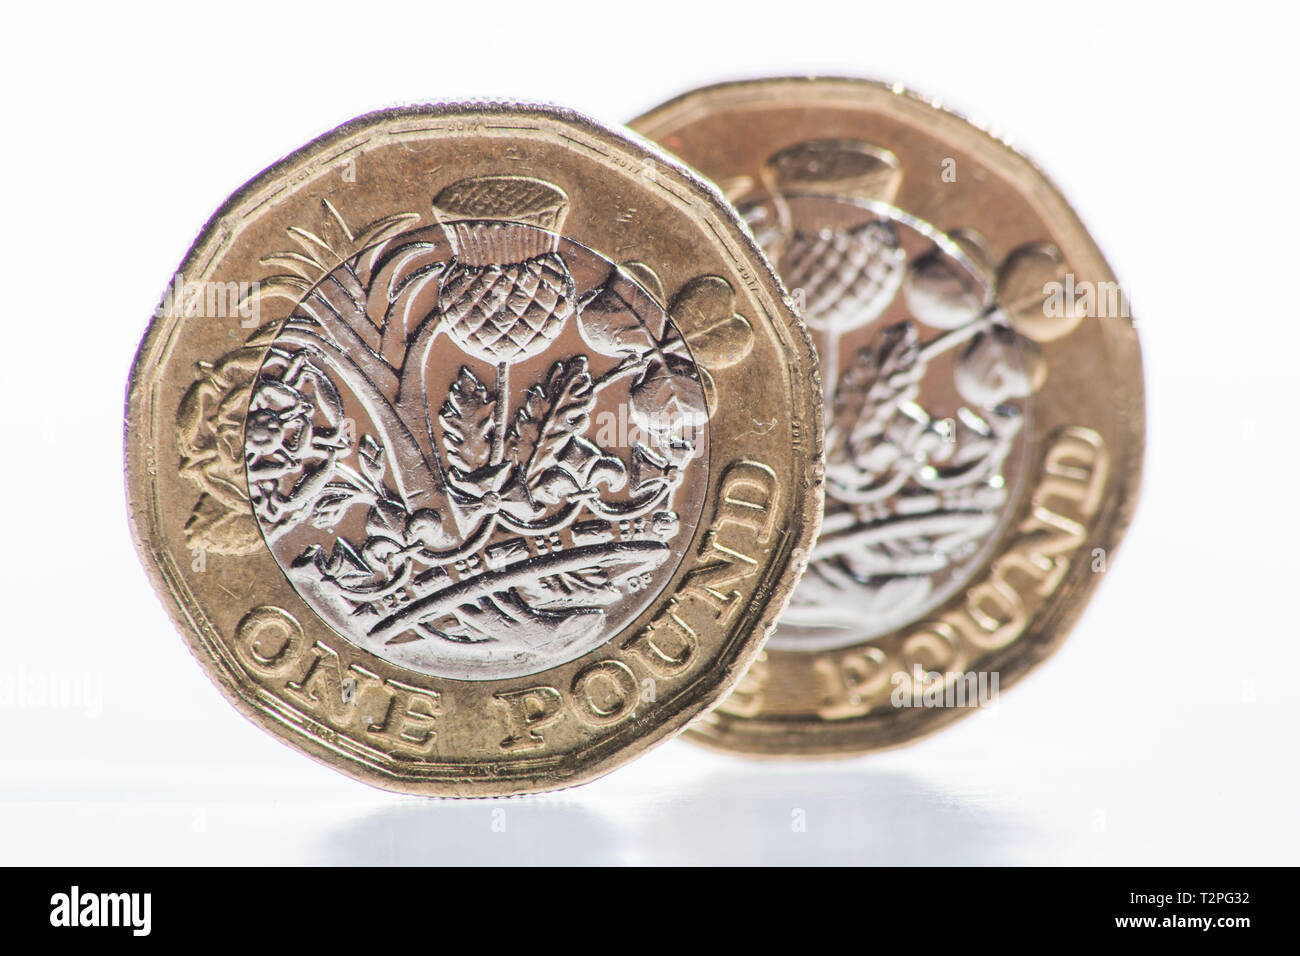 Coins. The One Pound Coin. Stock Photo